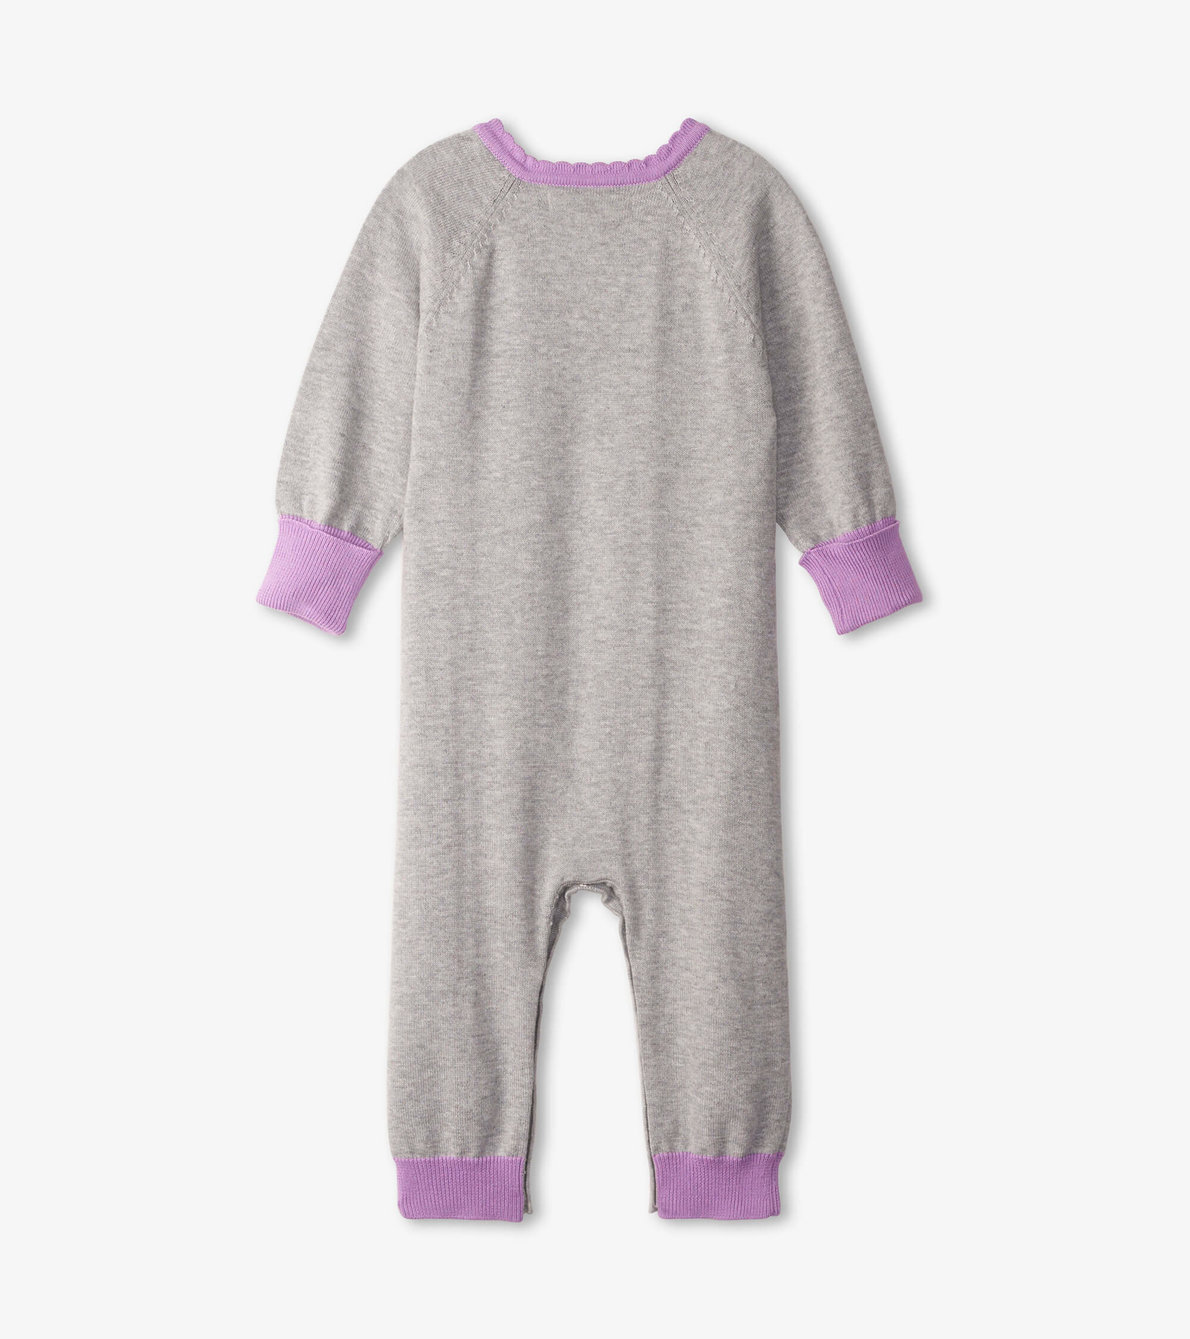 View larger image of Majestic Owl Baby Sweater Romper